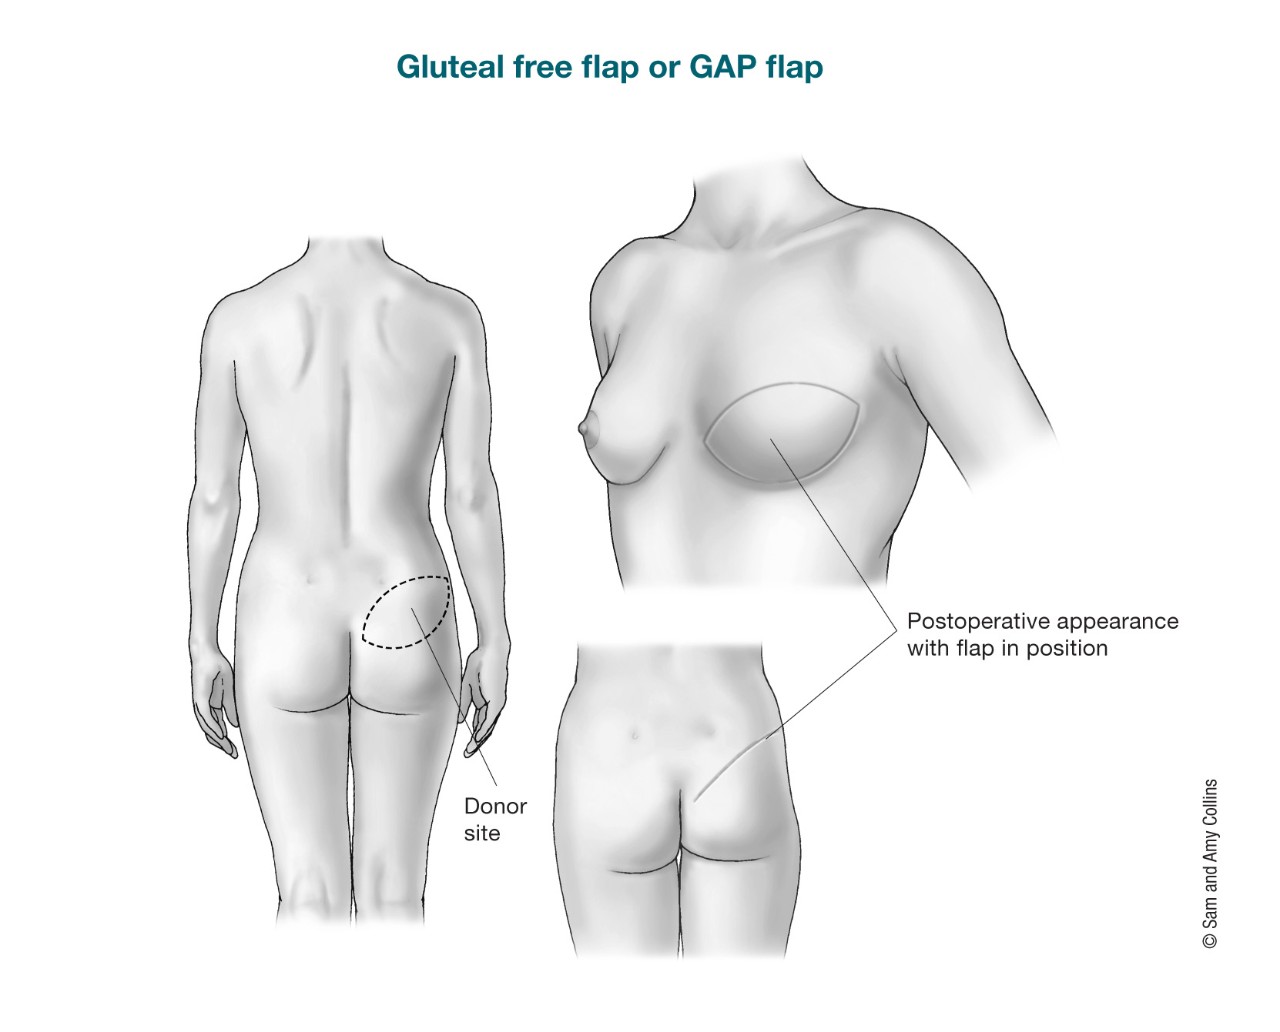 illustration showing the donor site of a GAP flap and the postoperative appearance with flap in position